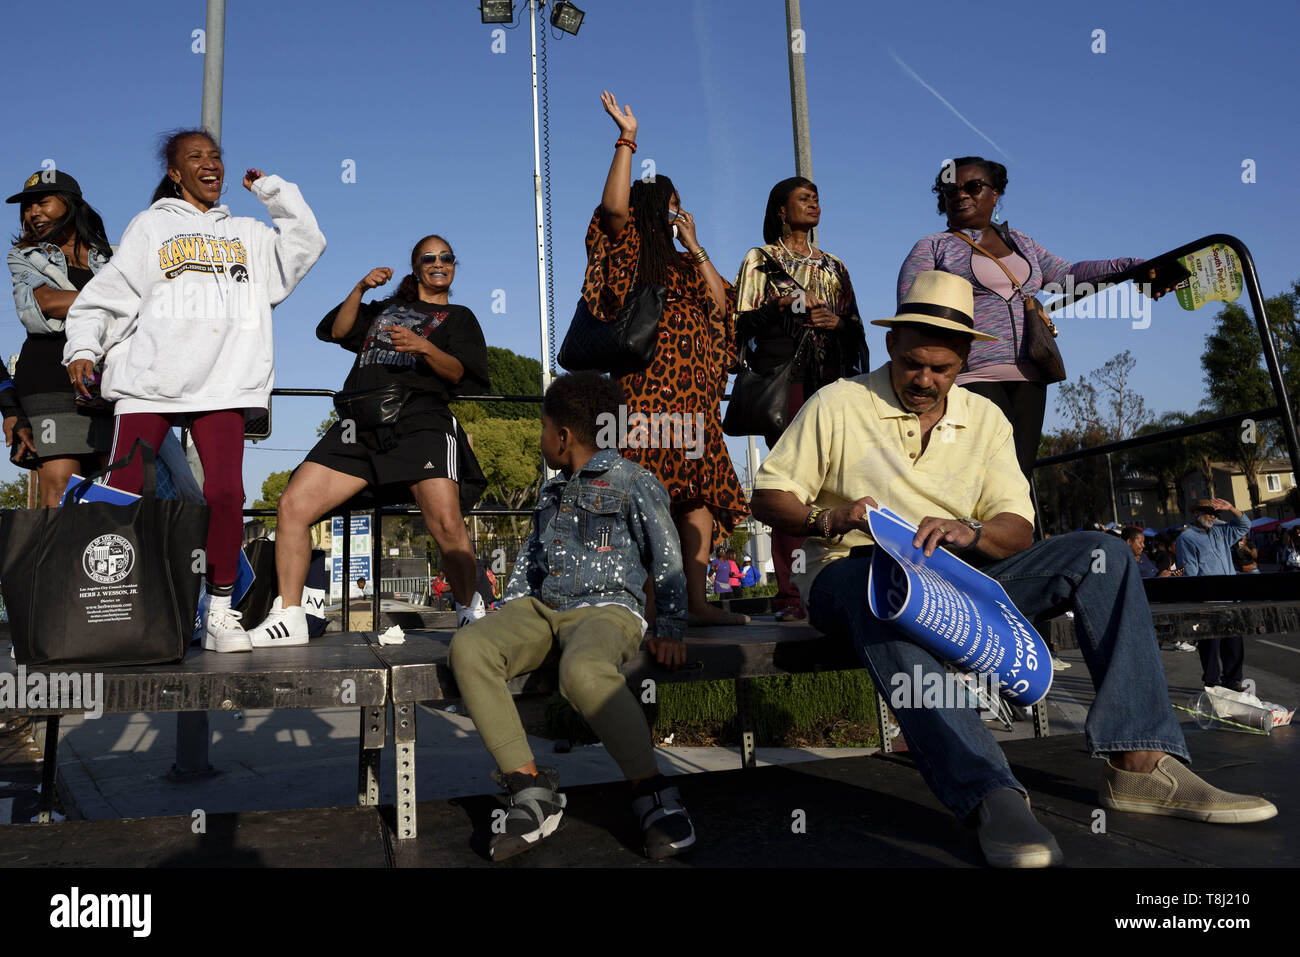 Los Angeles, CA, USA. 4th May, 2019. People seen having fun during the festival.People gather at a festival celebrating the renaming of Rodeo Road to Obama Boulevard, in honor of former US President Barack Obama in Los Angeles, California. Credit: Ronen Tivony/SOPA Images/ZUMA Wire/Alamy Live News Stock Photo